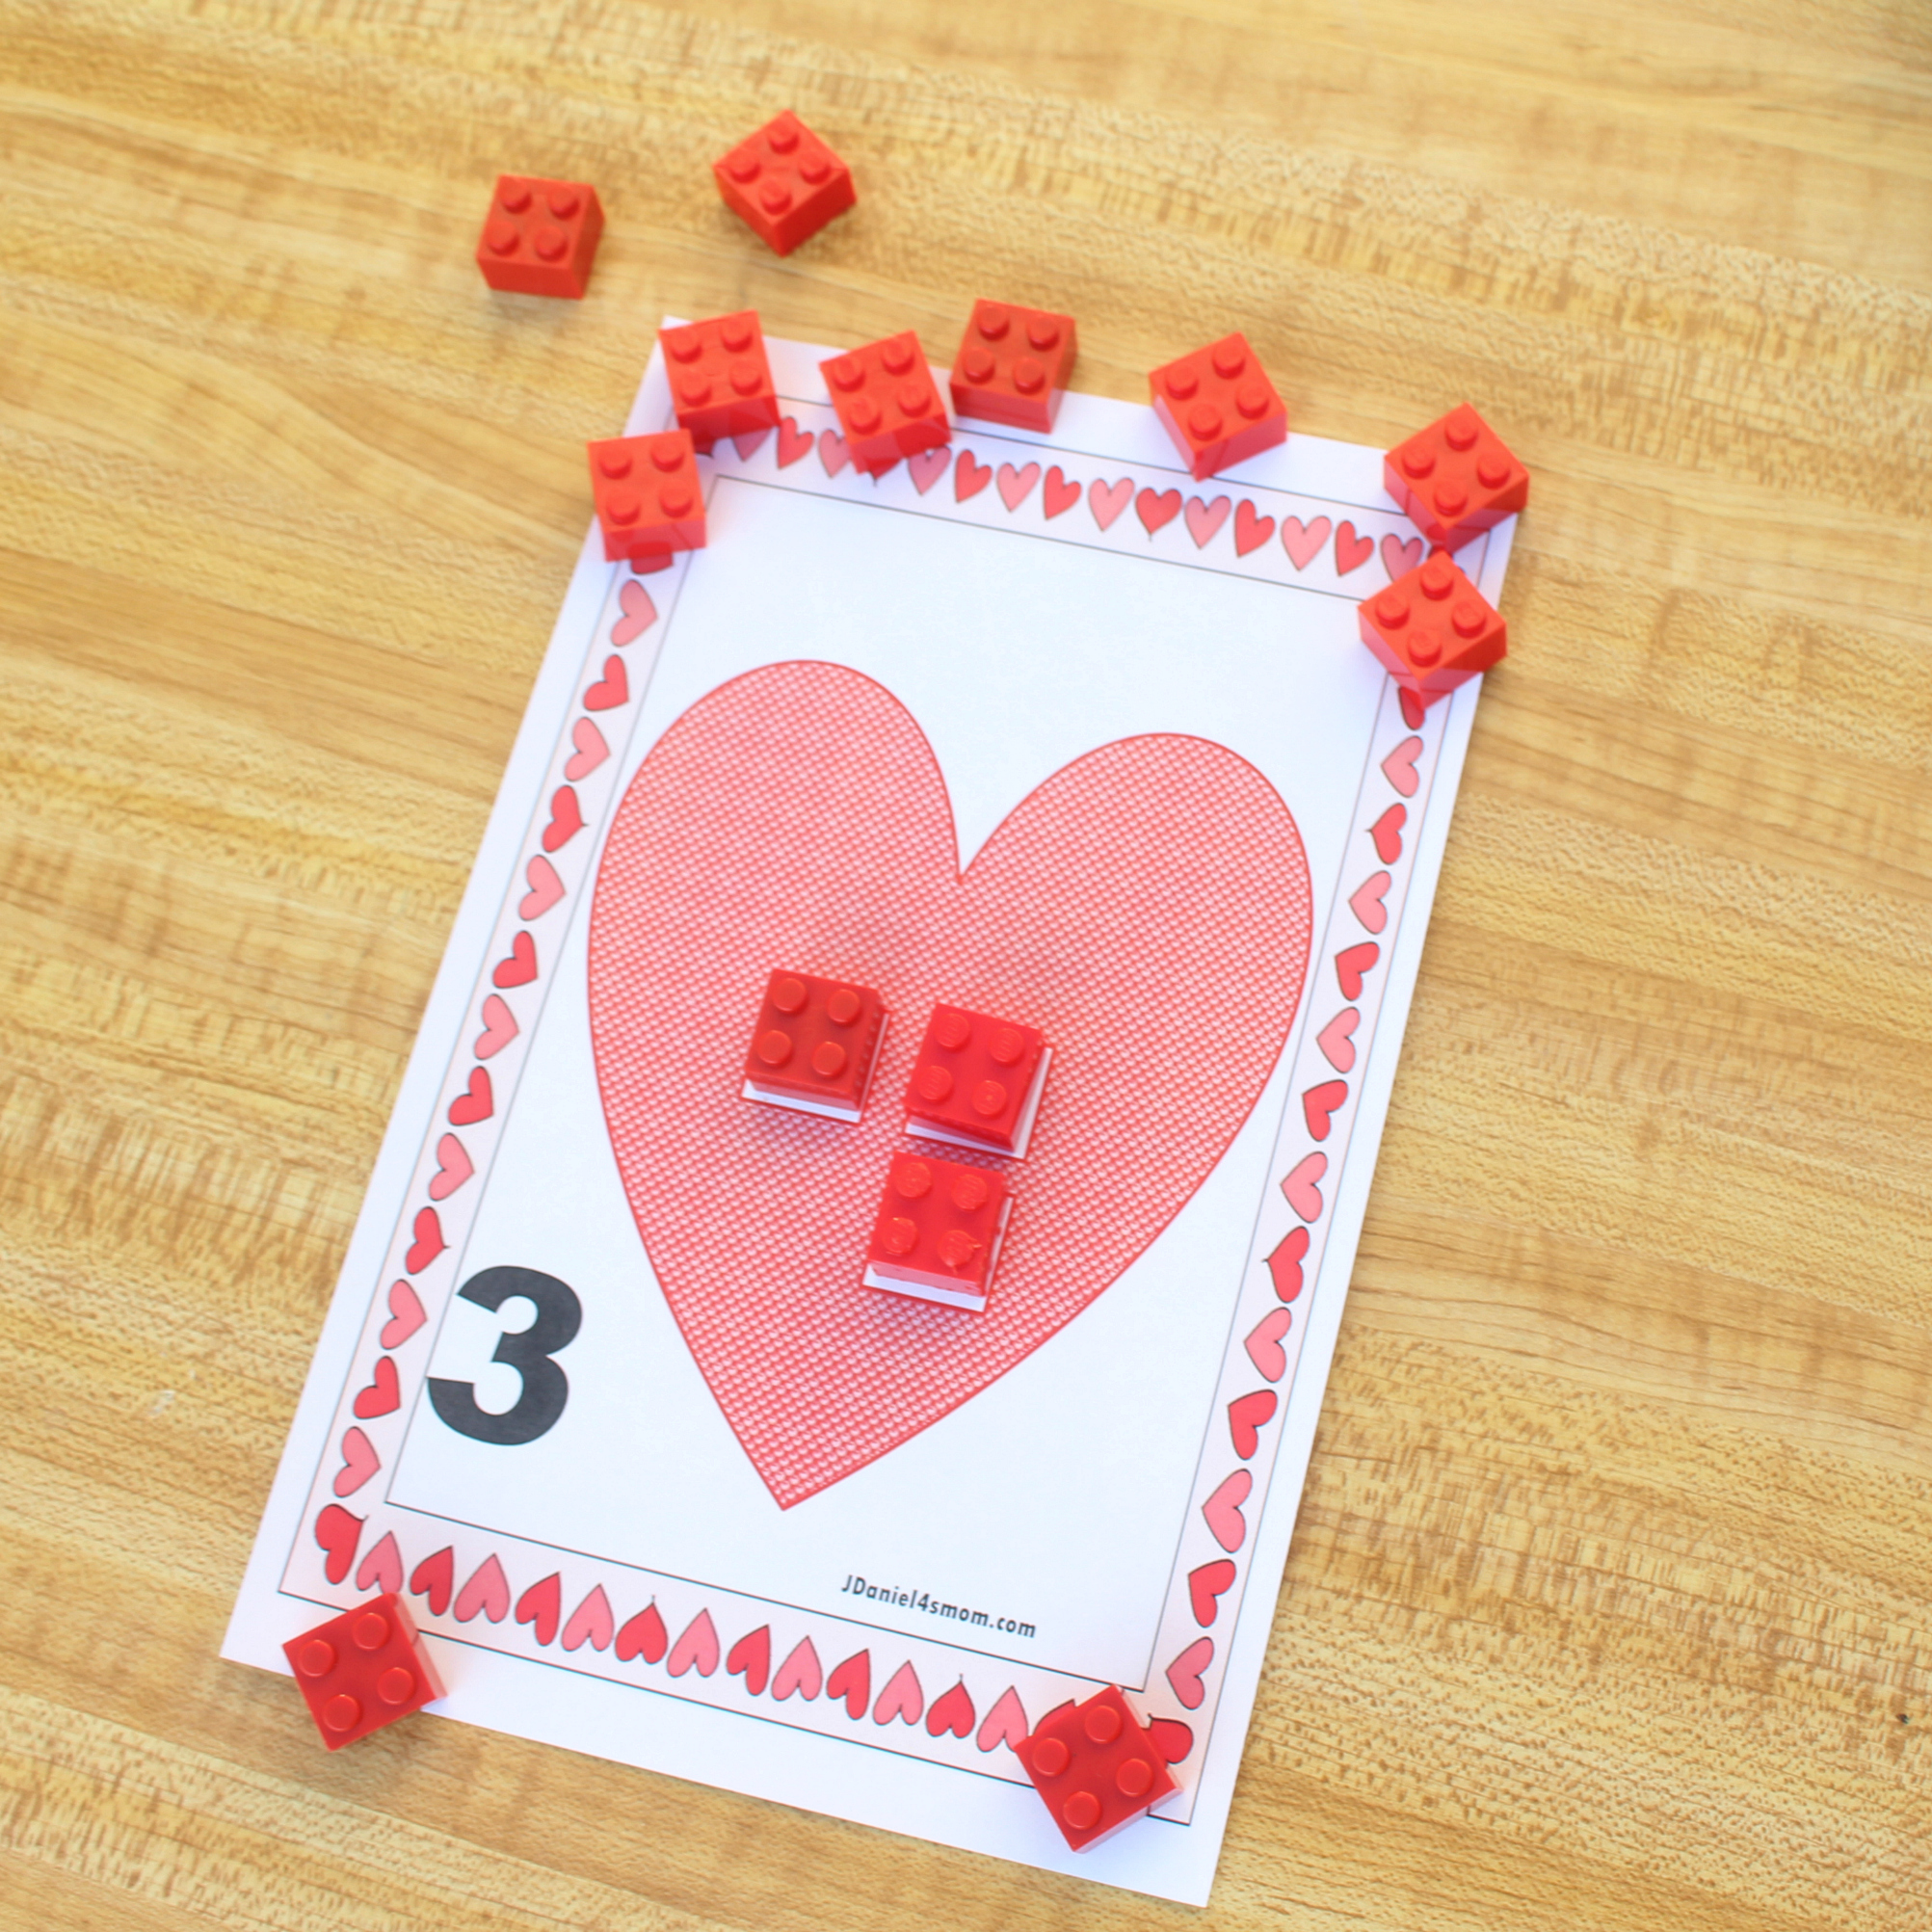 LEGO Math Valentine Counting Activity - Exploring the Number Three